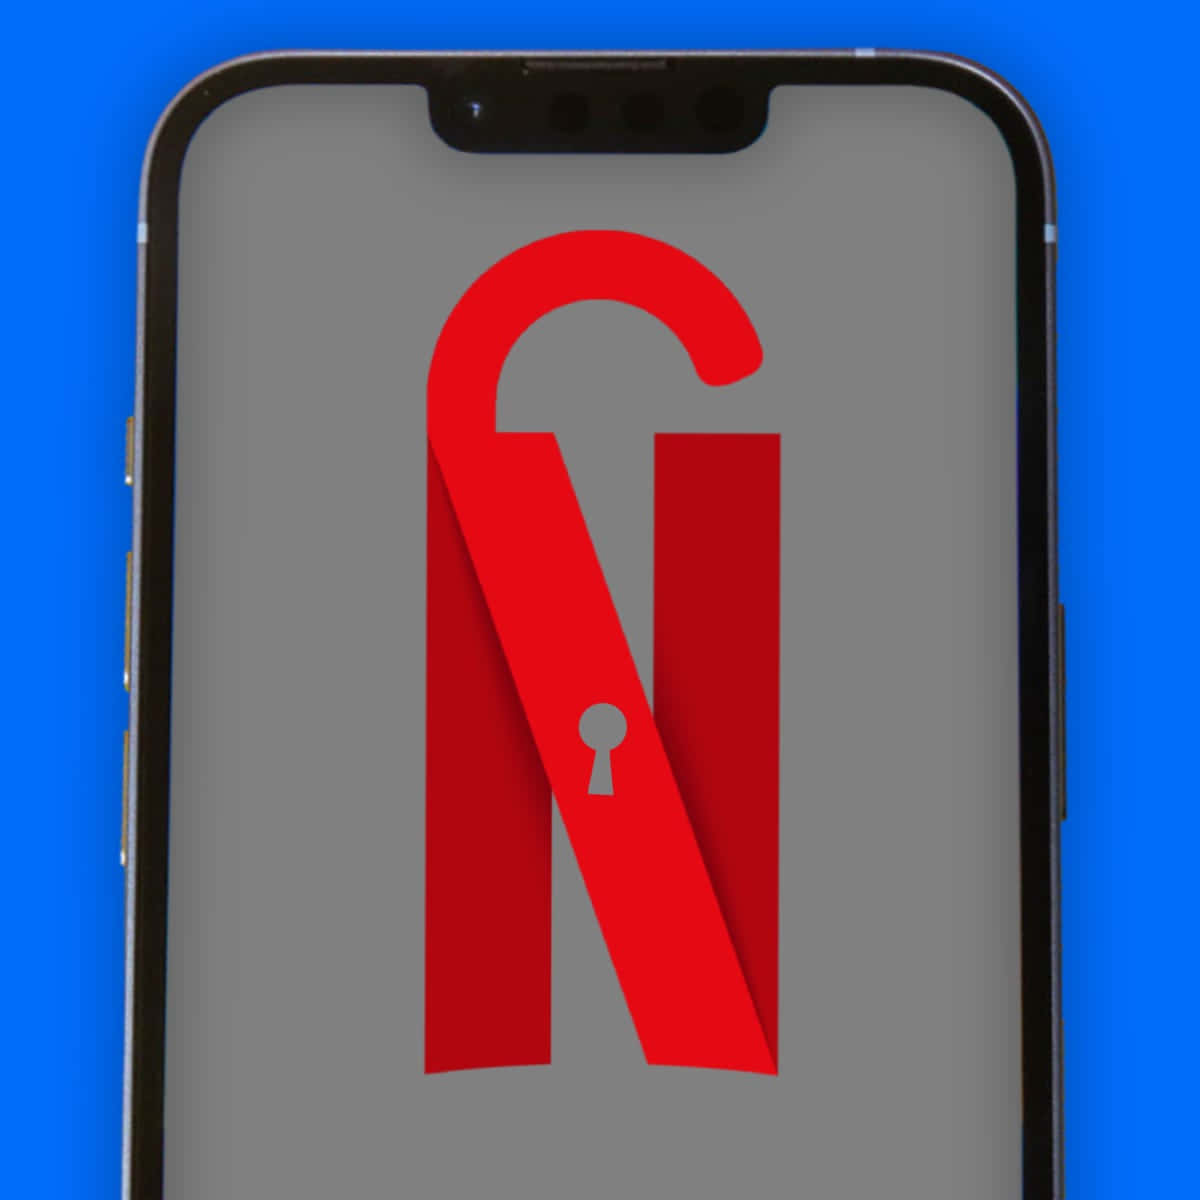 A Phone With A Red Lock On It